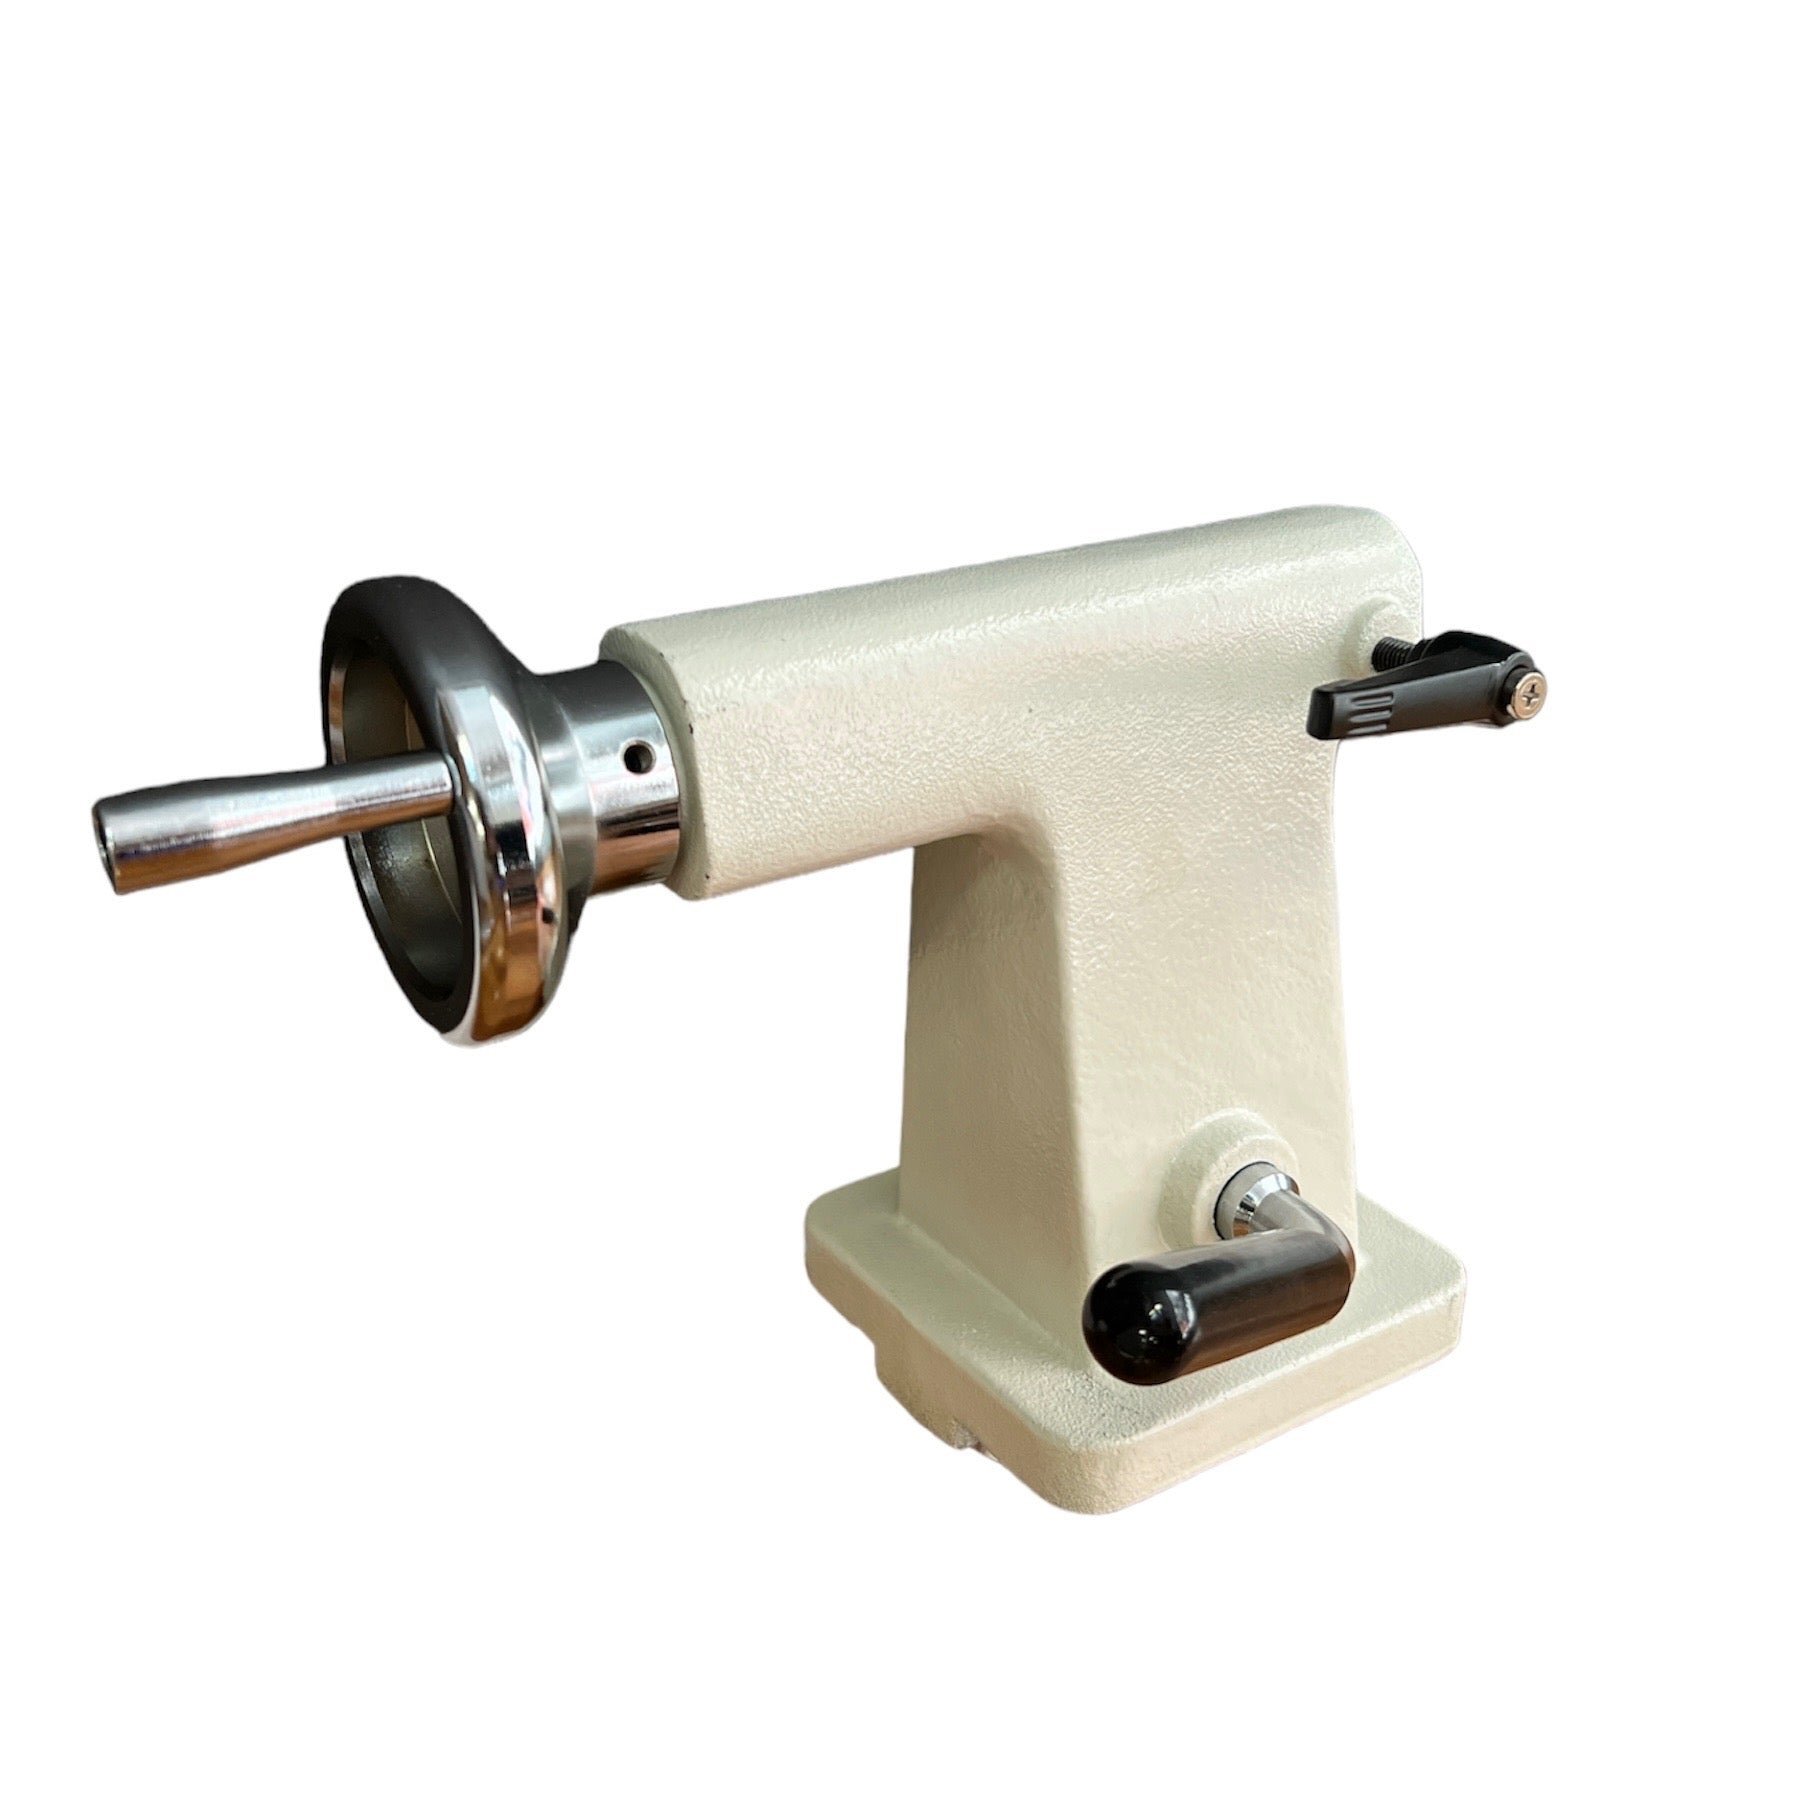 Tailstock suit WL1220A by Woodfast